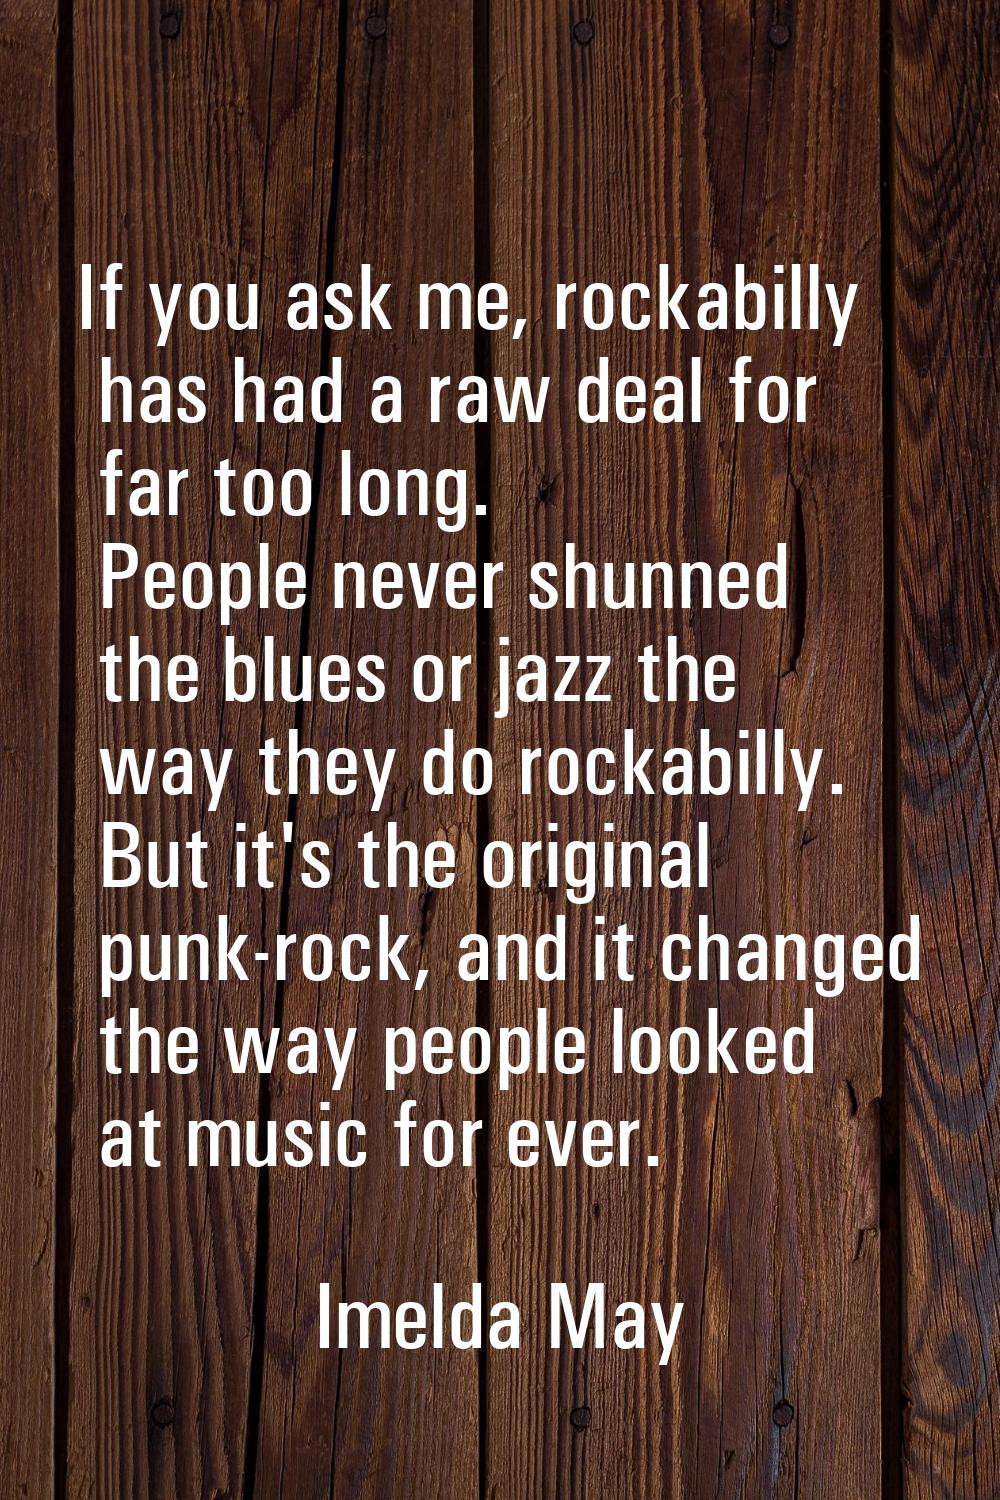 If you ask me, rockabilly has had a raw deal for far too long. People never shunned the blues or ja